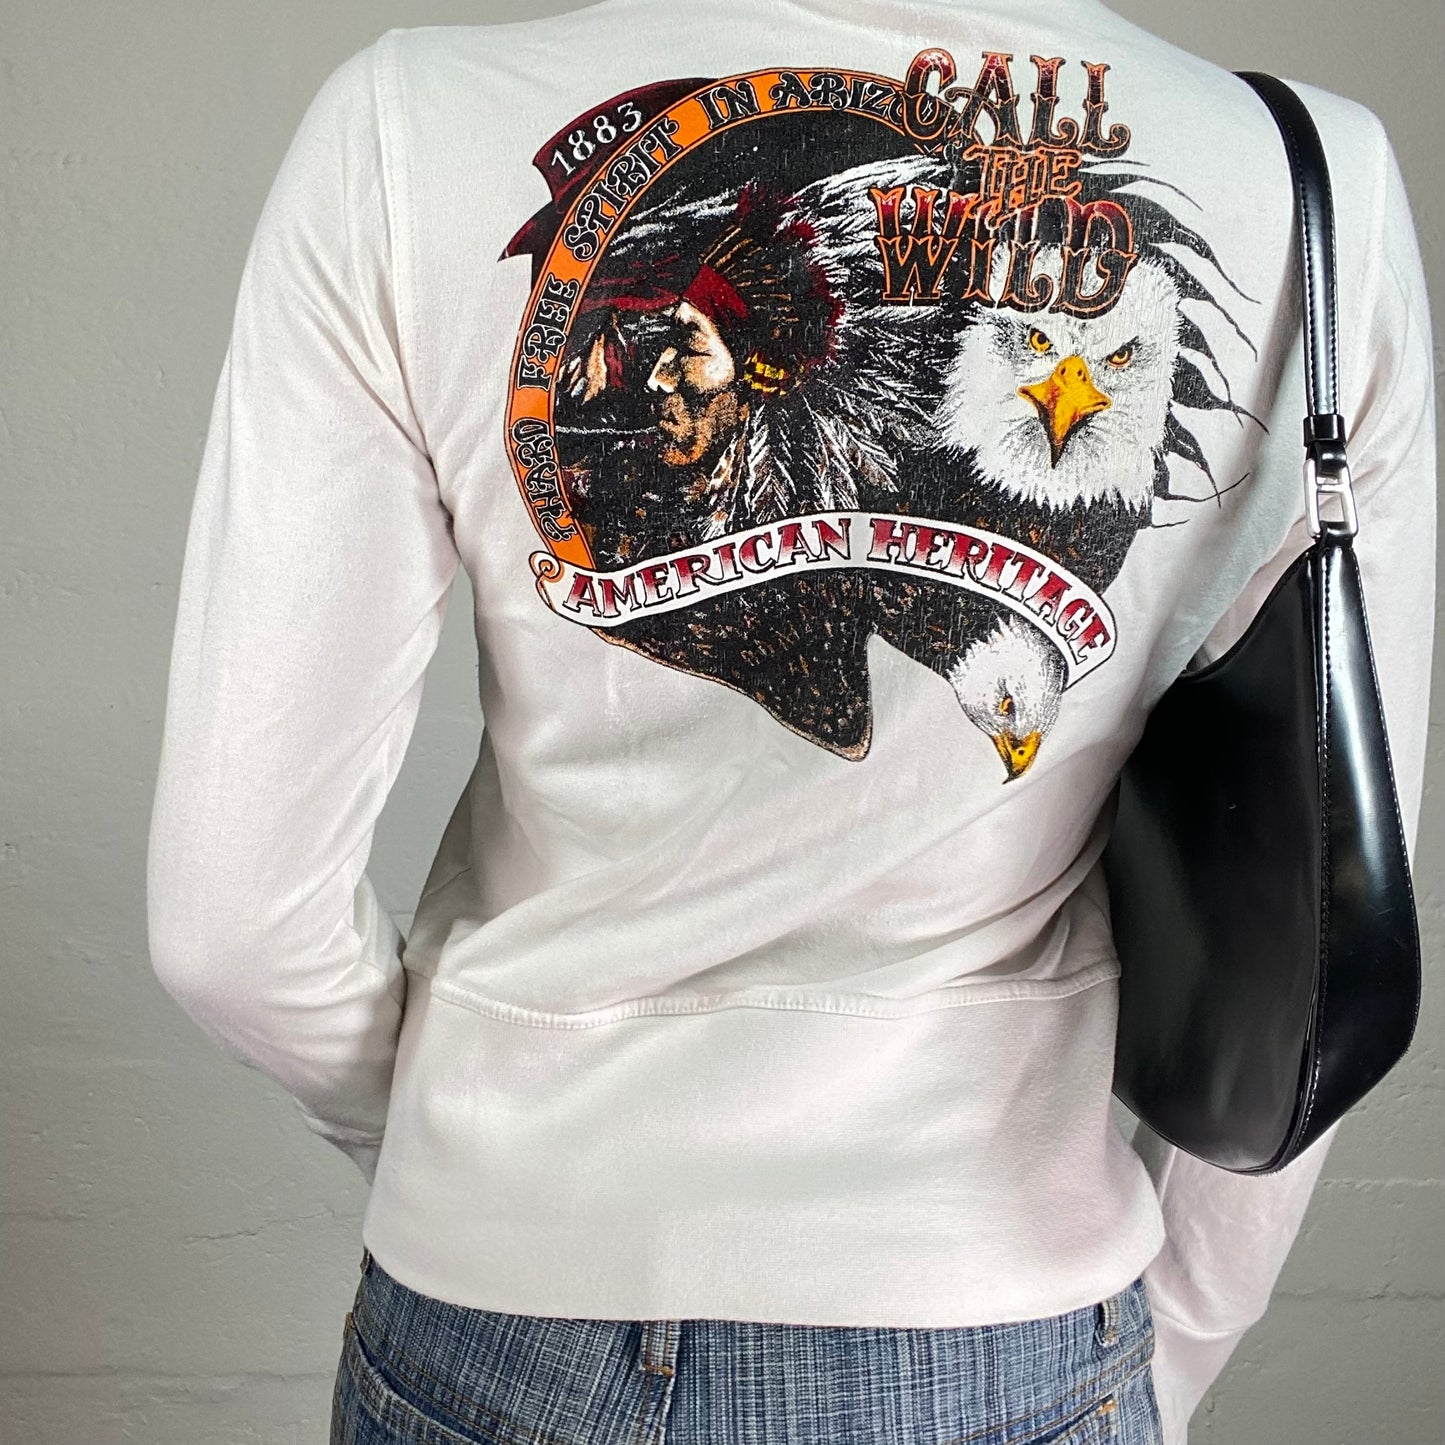 Vintage 2000's Grunge White Zip Up Pullover with Gold No Stealing Freedom and Biker Vibe Illustration Prints (M)